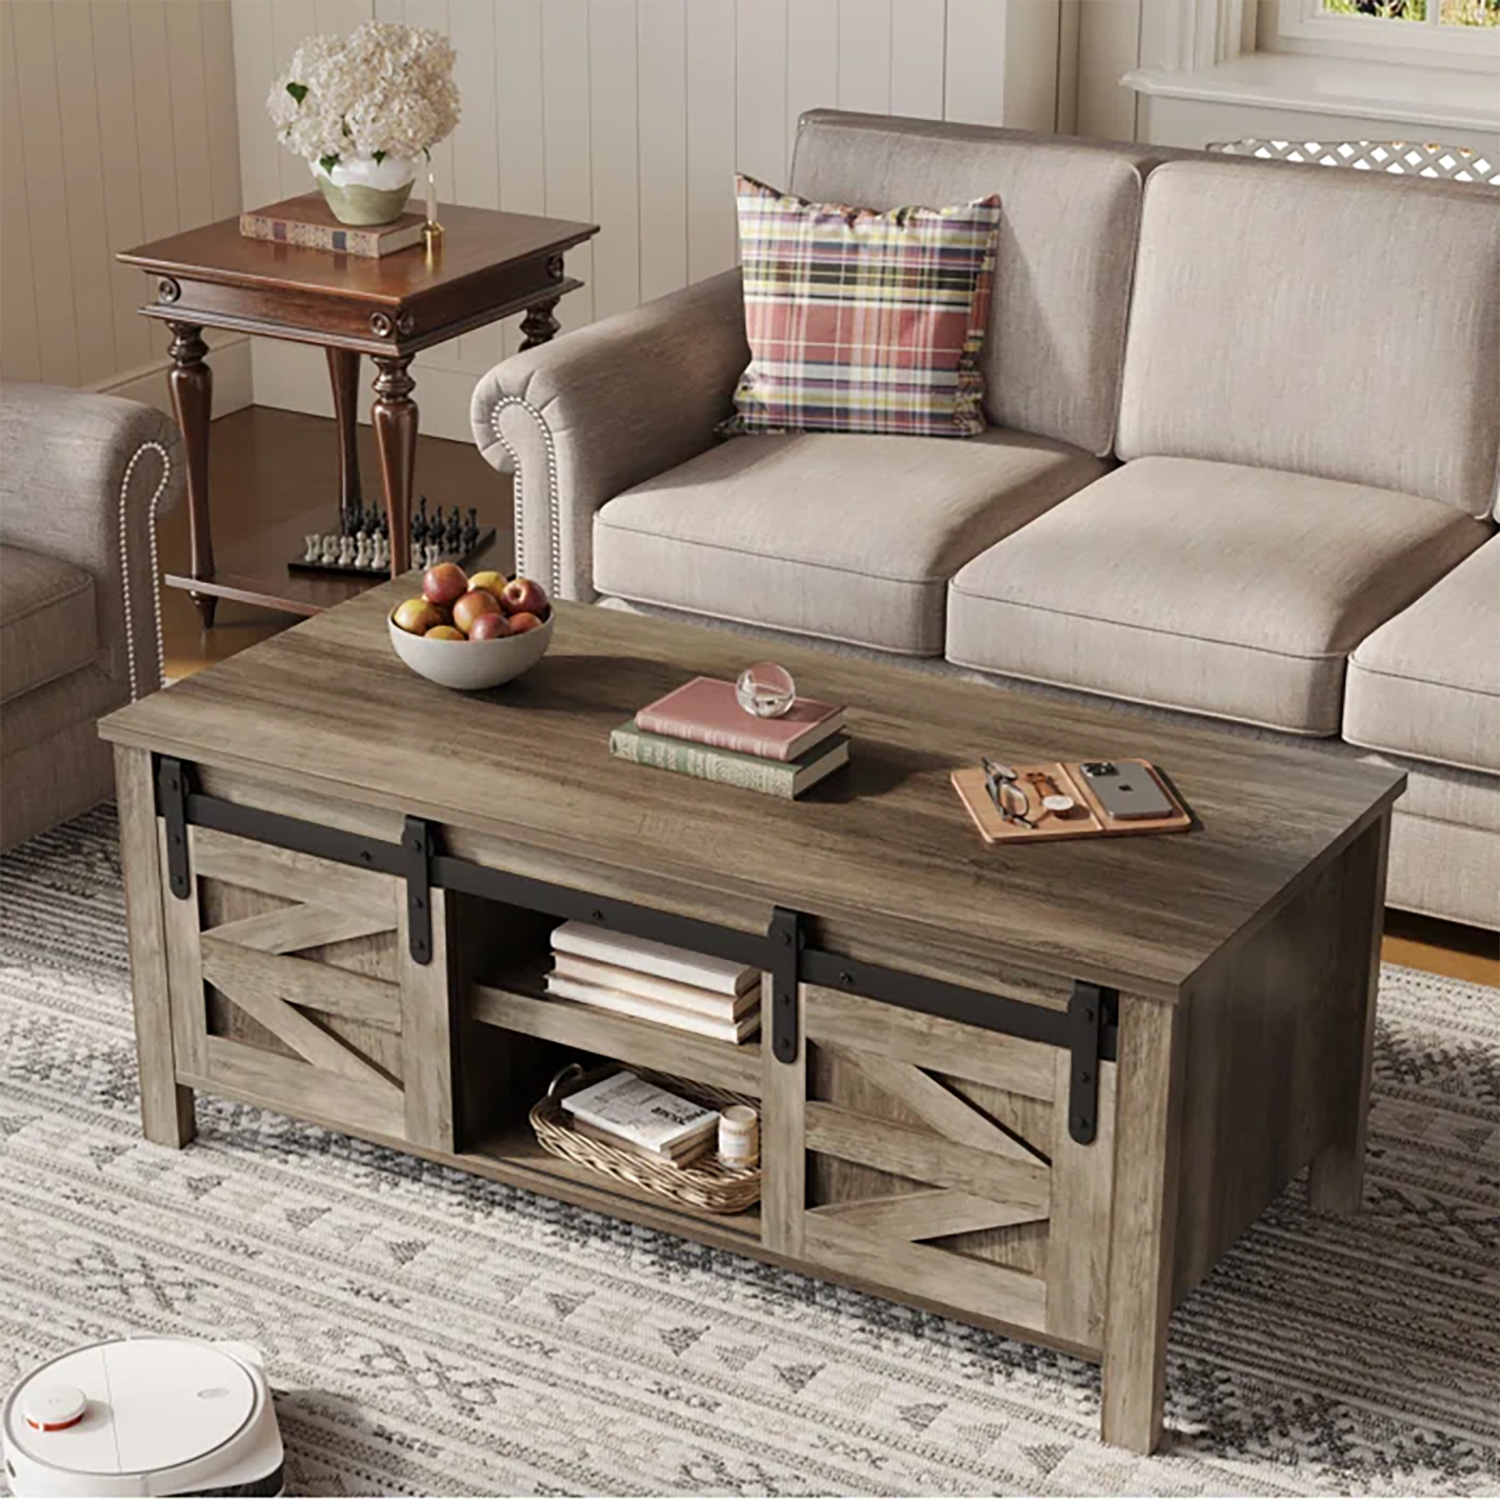 Vineego Wood Farmhouse Coffee Table With Storage In The Coffee Tables  Department At Lowes Regarding Coffee Tables With Storage And Barn Doors (Photo 11 of 15)